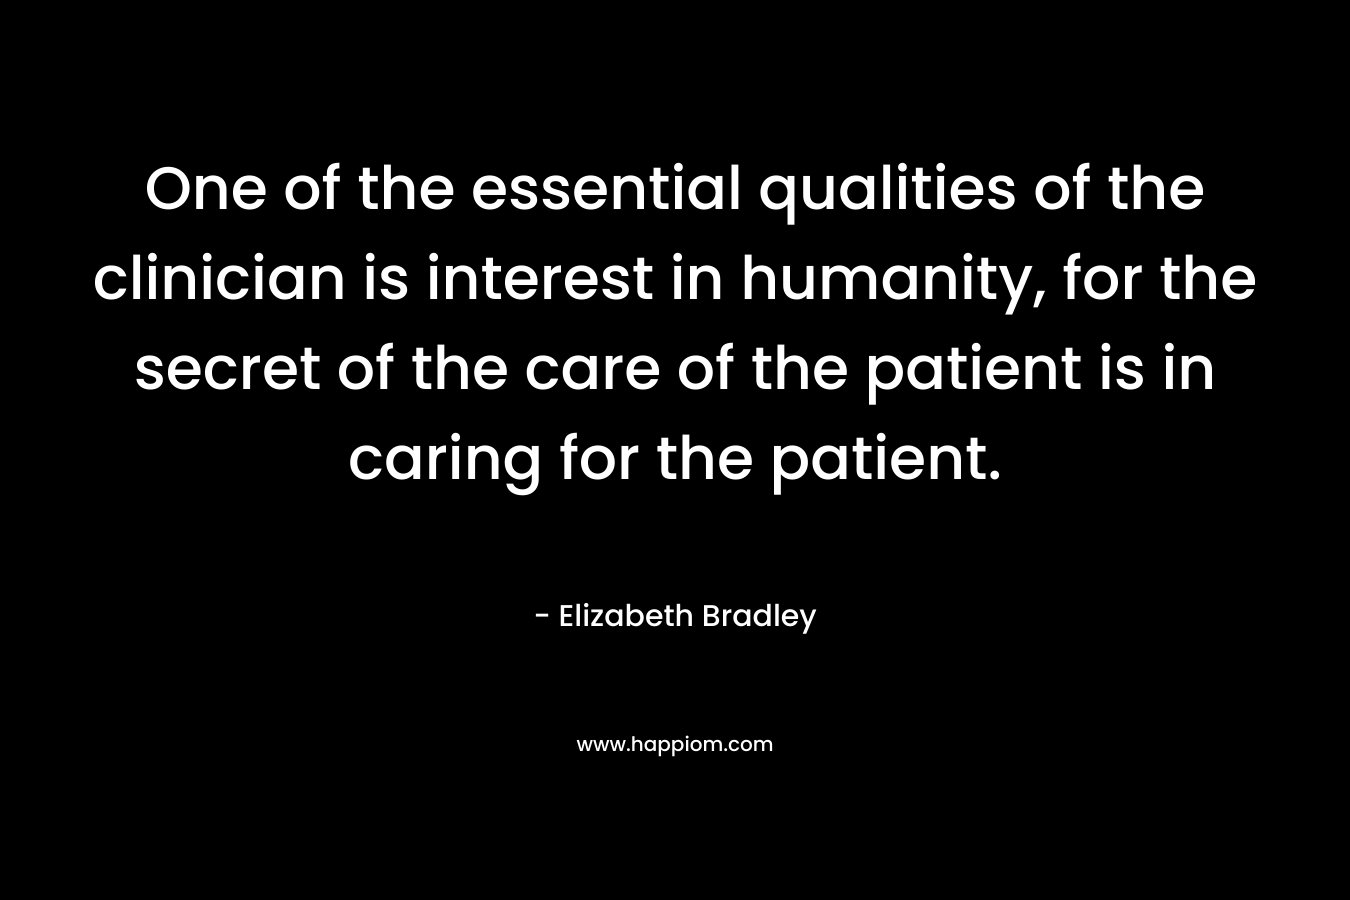 One of the essential qualities of the clinician is interest in humanity, for the secret of the care of the patient is in caring for the patient.